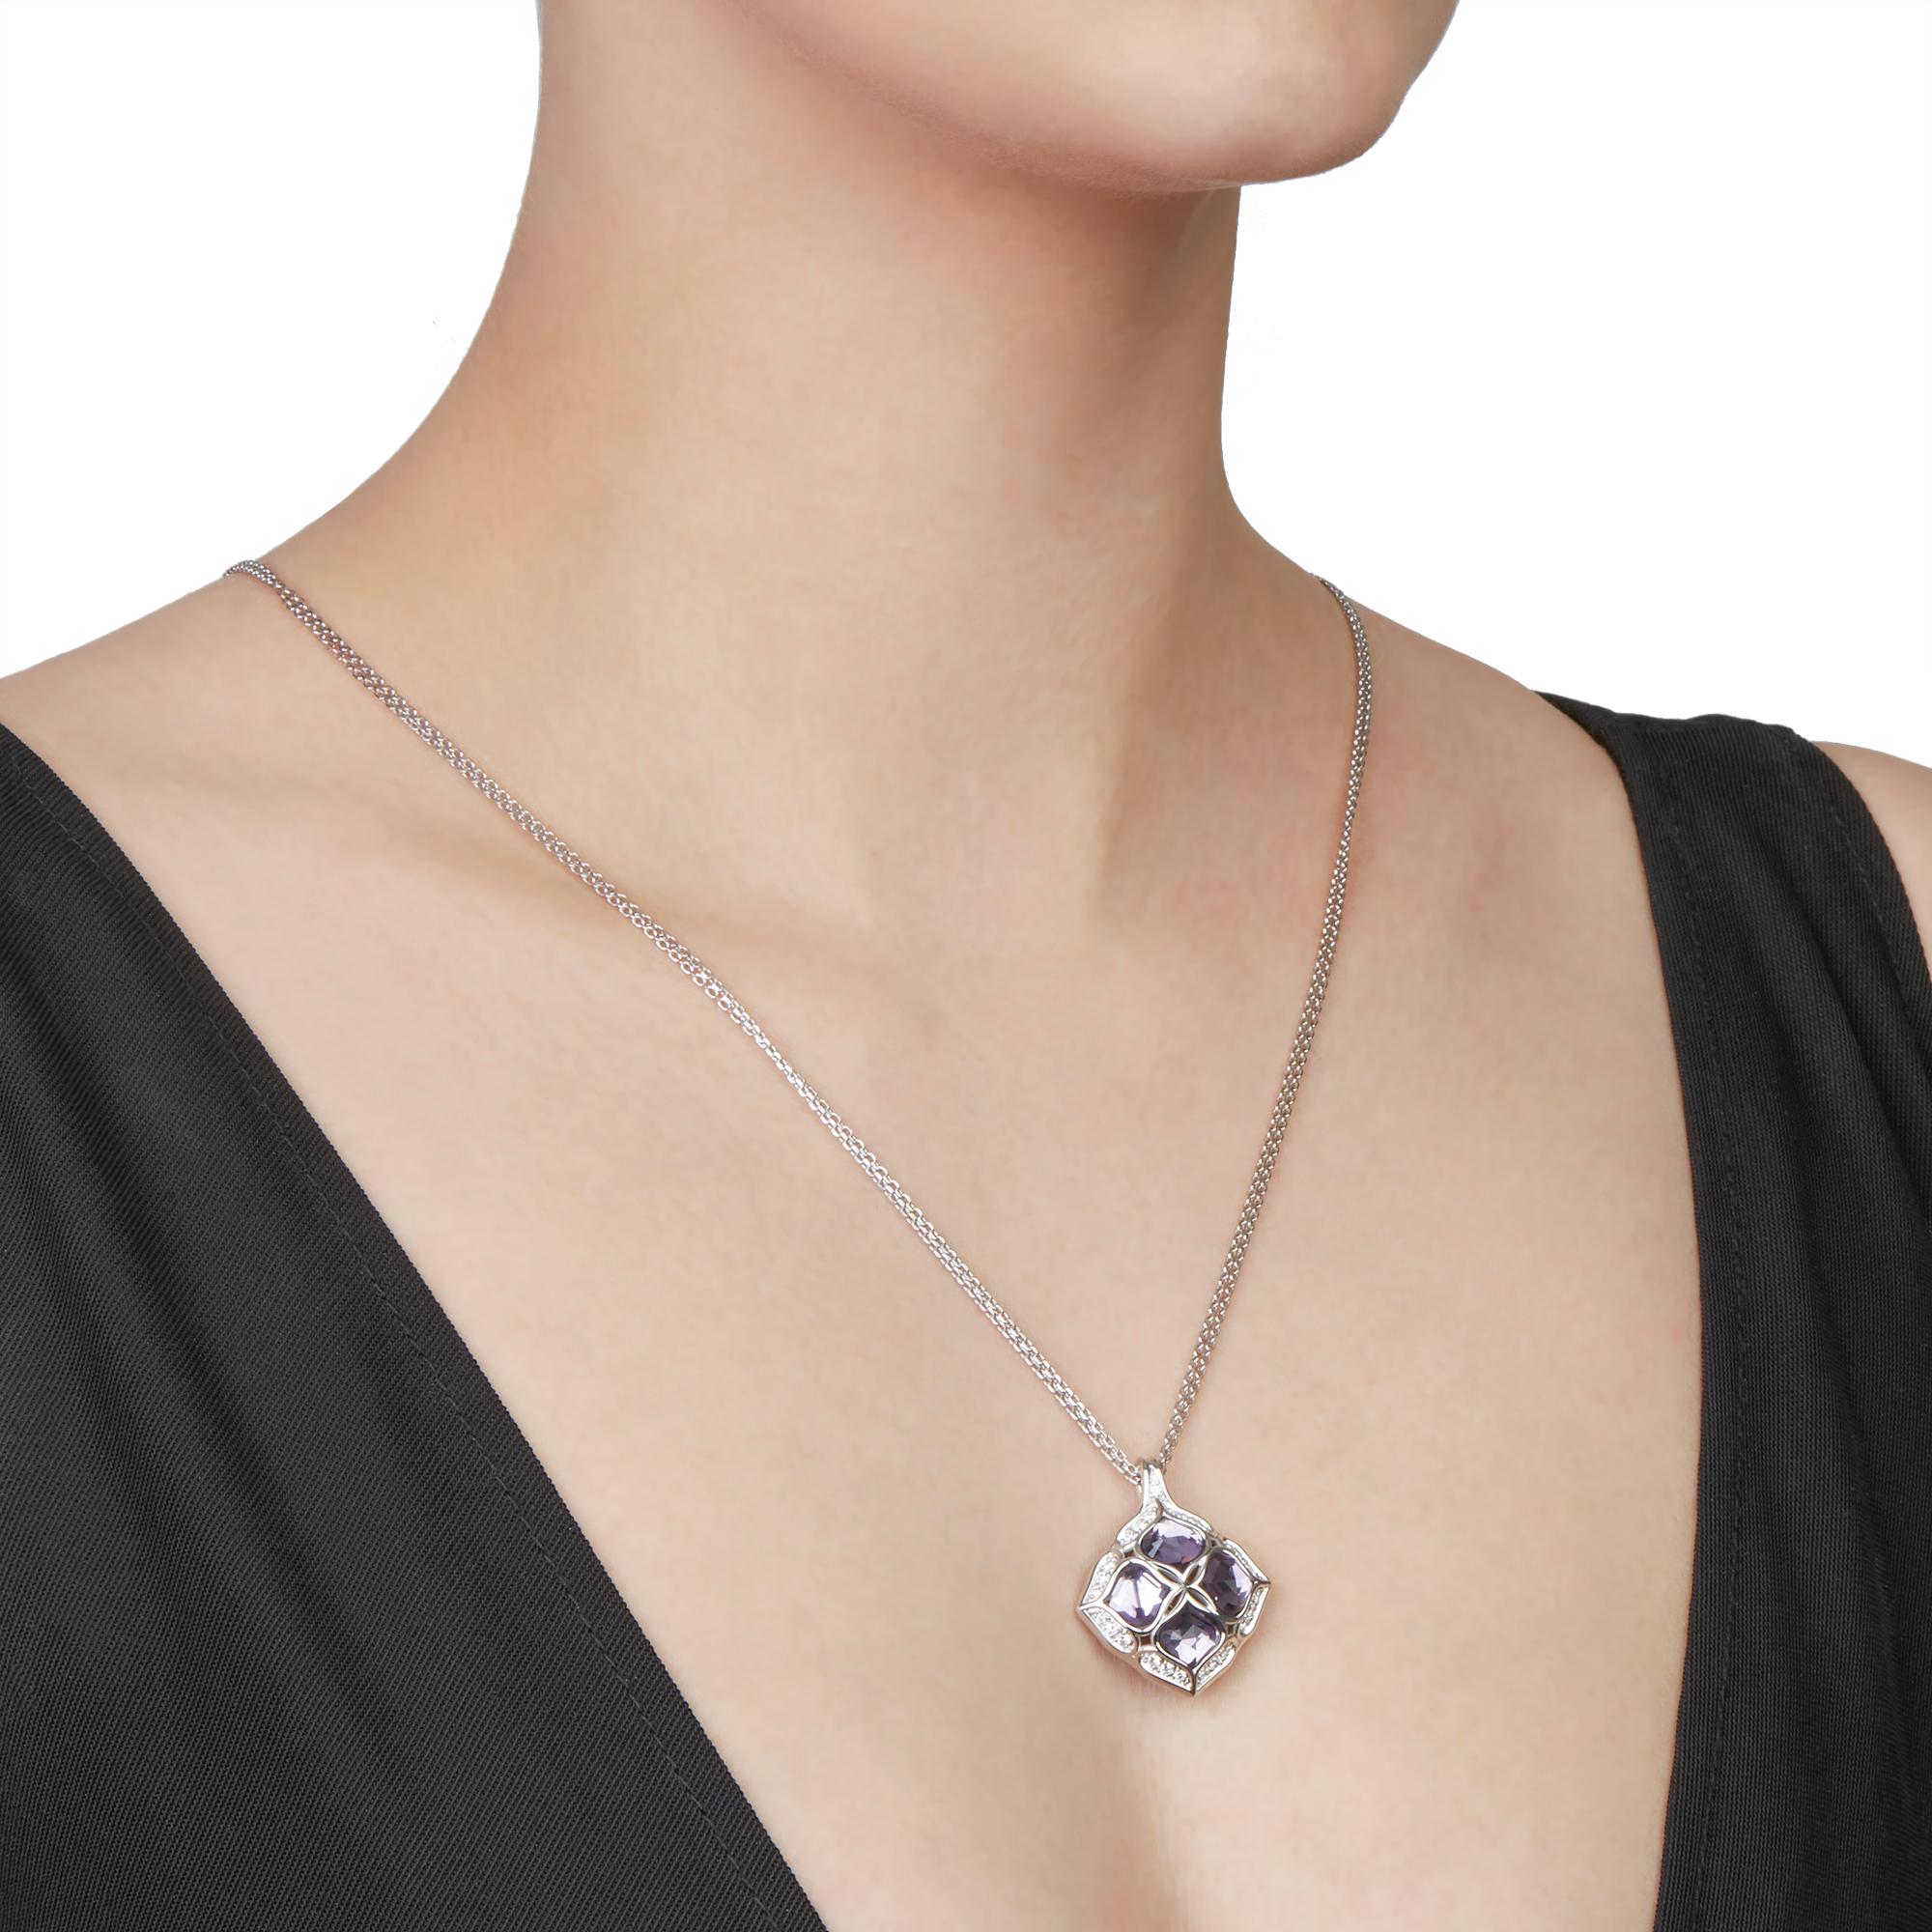 This Necklace by Chopard is from their Imperiale collection and features 4 Amethysts & 26 round brilliant cut Diamonds of 0.50ct total colour G, clarity VS, made in 18k White Gold. The Necklace has a secure lobster clasp. Complete with Xupes